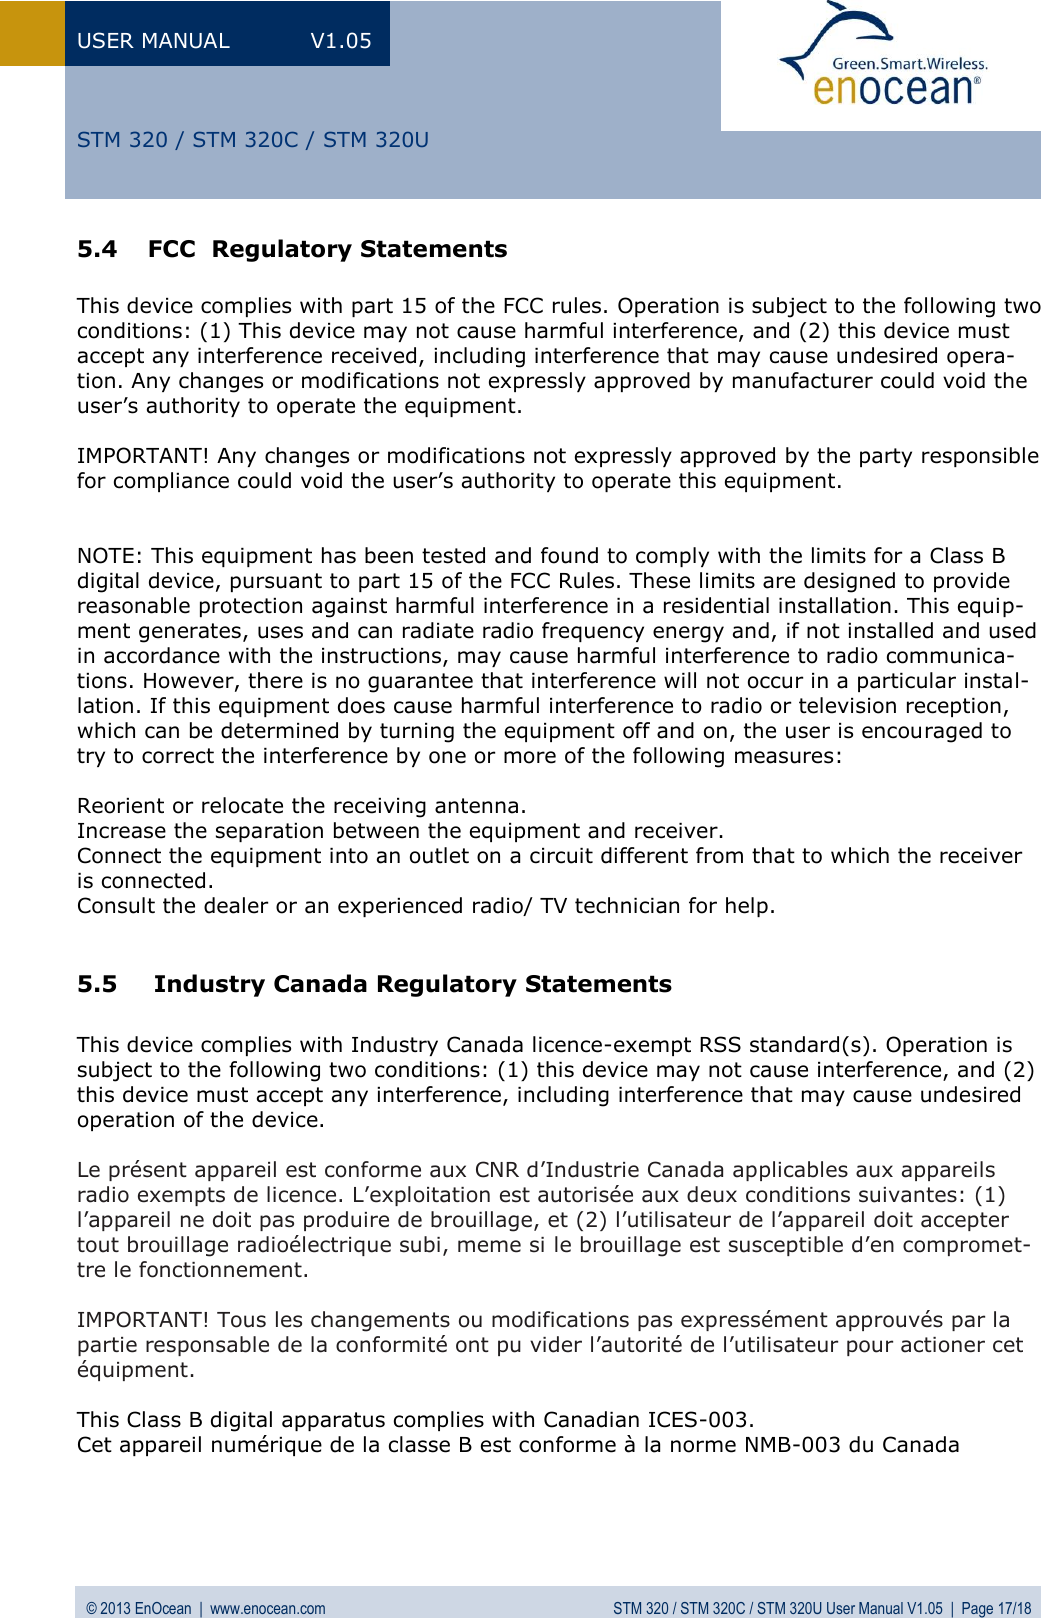 USER MANUAL  V1.05 © 2013 EnOcean  |  www.enocean.com  STM 320 / STM 320C / STM 320U User Manual V1.05  |  Page 17/18   STM 320 / STM 320C / STM 320U 5.4 FCC  Regulatory Statements  This device complies with part 15 of the FCC rules. Operation is subject to the following two conditions: (1) This device may not cause harmful interference, and (2) this device must accept any interference received, including interference that may cause undesired opera-tion. Any changes or modifications not expressly approved by manufacturer could void the user’s authority to operate the equipment.   IMPORTANT! Any changes or modifications not expressly approved by the party responsible for compliance could void the user’s authority to operate this equipment.    NOTE: This equipment has been tested and found to comply with the limits for a Class B digital device, pursuant to part 15 of the FCC Rules. These limits are designed to provide reasonable protection against harmful interference in a residential installation. This equip-ment generates, uses and can radiate radio frequency energy and, if not installed and used in accordance with the instructions, may cause harmful interference to radio communica-tions. However, there is no guarantee that interference will not occur in a particular instal-lation. If this equipment does cause harmful interference to radio or television reception, which can be determined by turning the equipment off and on, the user is encouraged to try to correct the interference by one or more of the following measures:  Reorient or relocate the receiving antenna. Increase the separation between the equipment and receiver. Connect the equipment into an outlet on a circuit different from that to which the receiver is connected. Consult the dealer or an experienced radio/ TV technician for help.  5.5  Industry Canada Regulatory Statements  This device complies with Industry Canada licence-exempt RSS standard(s). Operation is subject to the following two conditions: (1) this device may not cause interference, and (2) this device must accept any interference, including interference that may cause undesired operation of the device.  Le présent appareil est conforme aux CNR d’Industrie Canada applicables aux appareils radio exempts de licence. L’exploitation est autorisée aux deux conditions suivantes: (1) l’appareil ne doit pas produire de brouillage, et (2) l’utilisateur de l’appareil doit accepter tout brouillage radioélectrique subi, meme si le brouillage est susceptible d’en compromet-tre le fonctionnement.   IMPORTANT! Tous les changements ou modifications pas expressément approuvés par la partie responsable de la conformité ont pu vider l’autorité de l’utilisateur pour actioner cet équipment.  This Class B digital apparatus complies with Canadian ICES-003. Cet appareil numérique de la classe B est conforme à la norme NMB-003 du Canada    